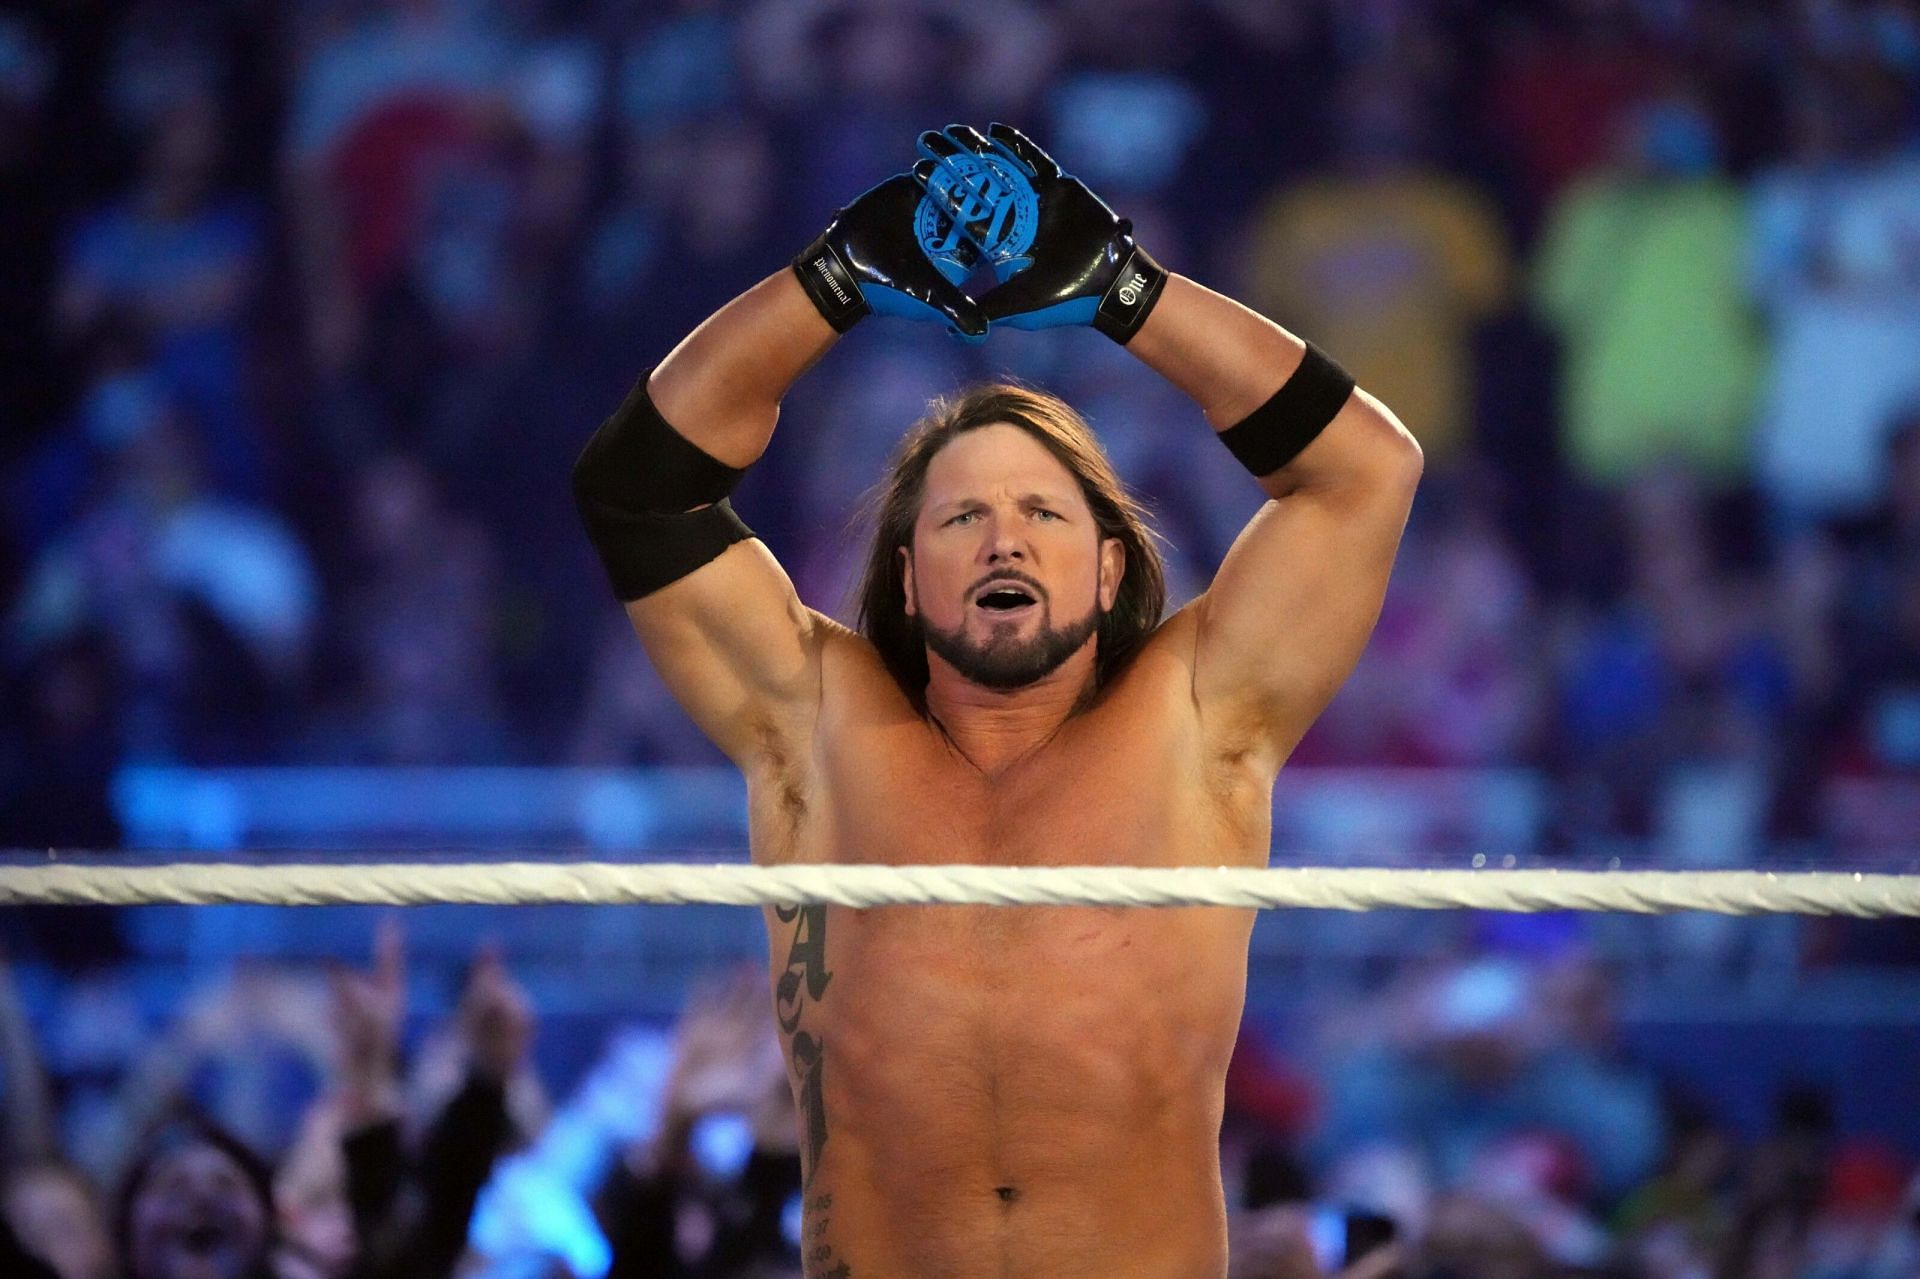 AJ Styles will not be at WWE Royal Rumble 2023